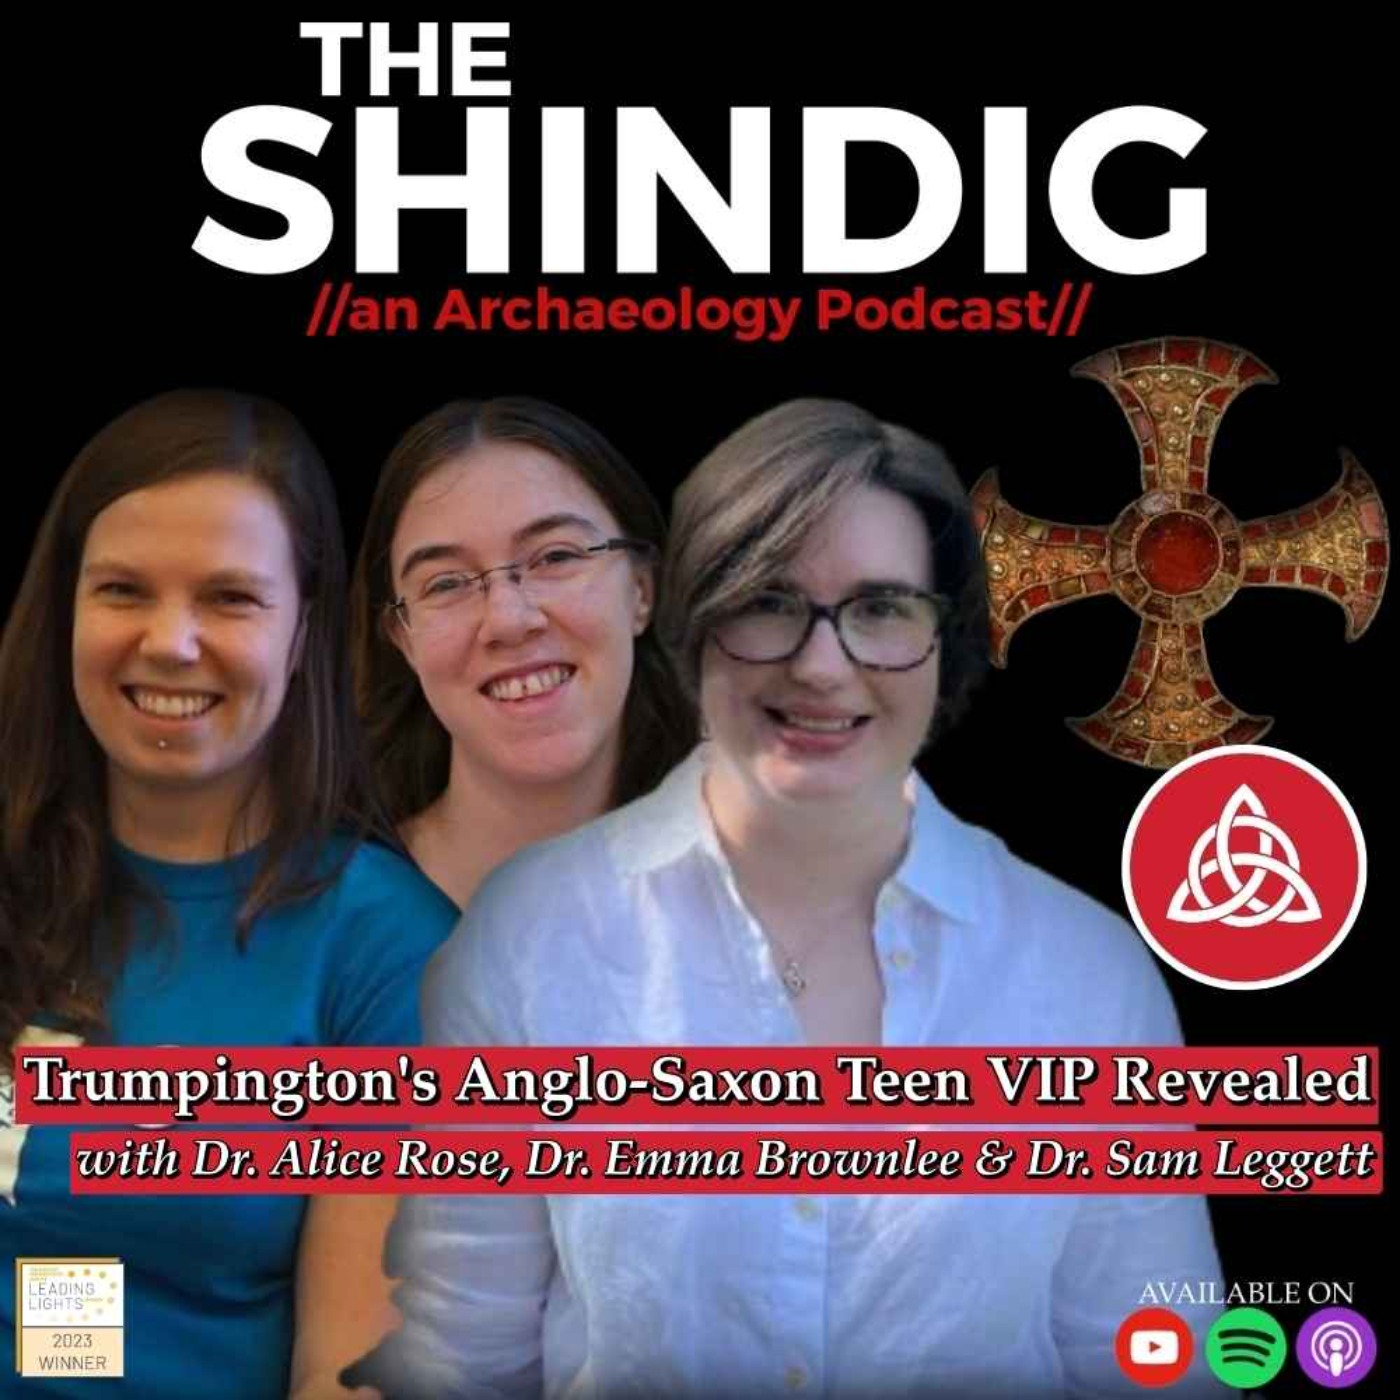 Trumpington’s Anglo-Saxon Teen VIP Revealed - With Dr. Alice Rose, Dr. Emma Brownlee & Dr. Sam Leggett